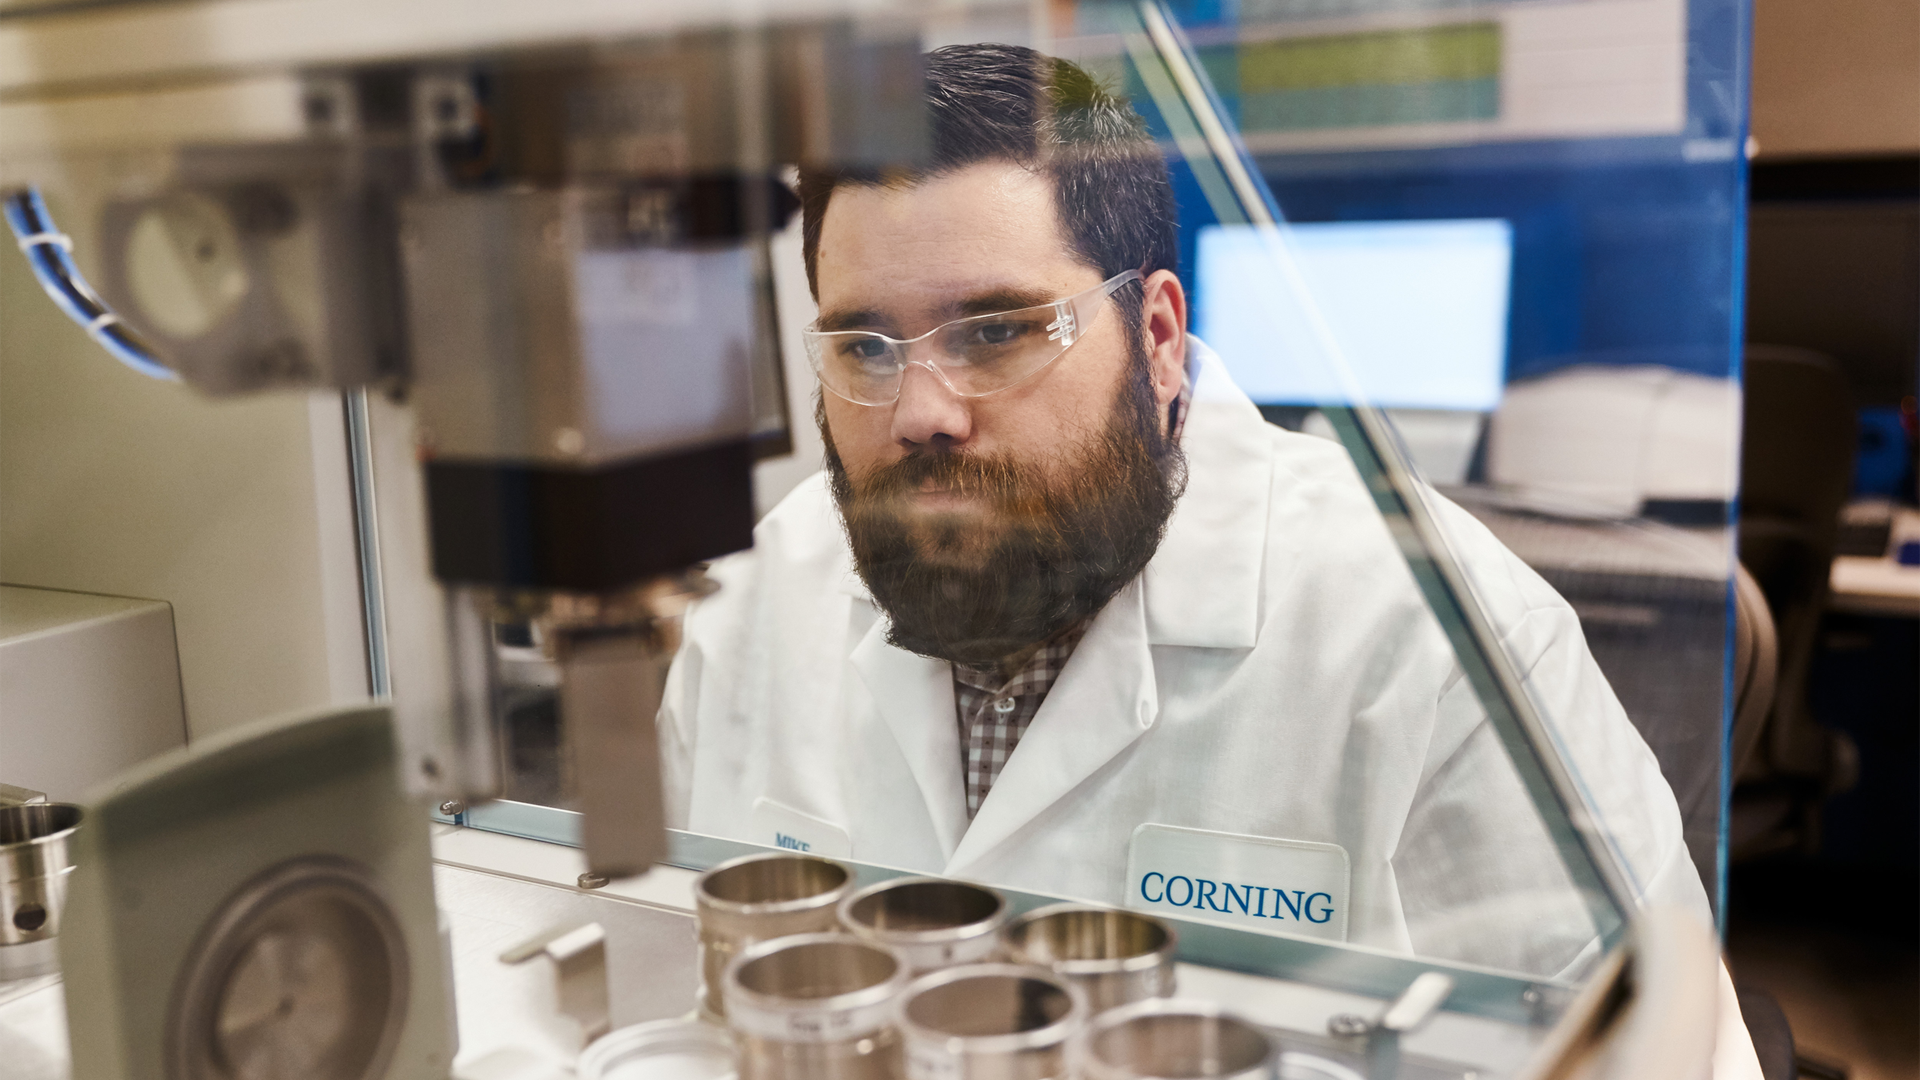 A worker at the Corning plant that makes glass for Apple's iPhones